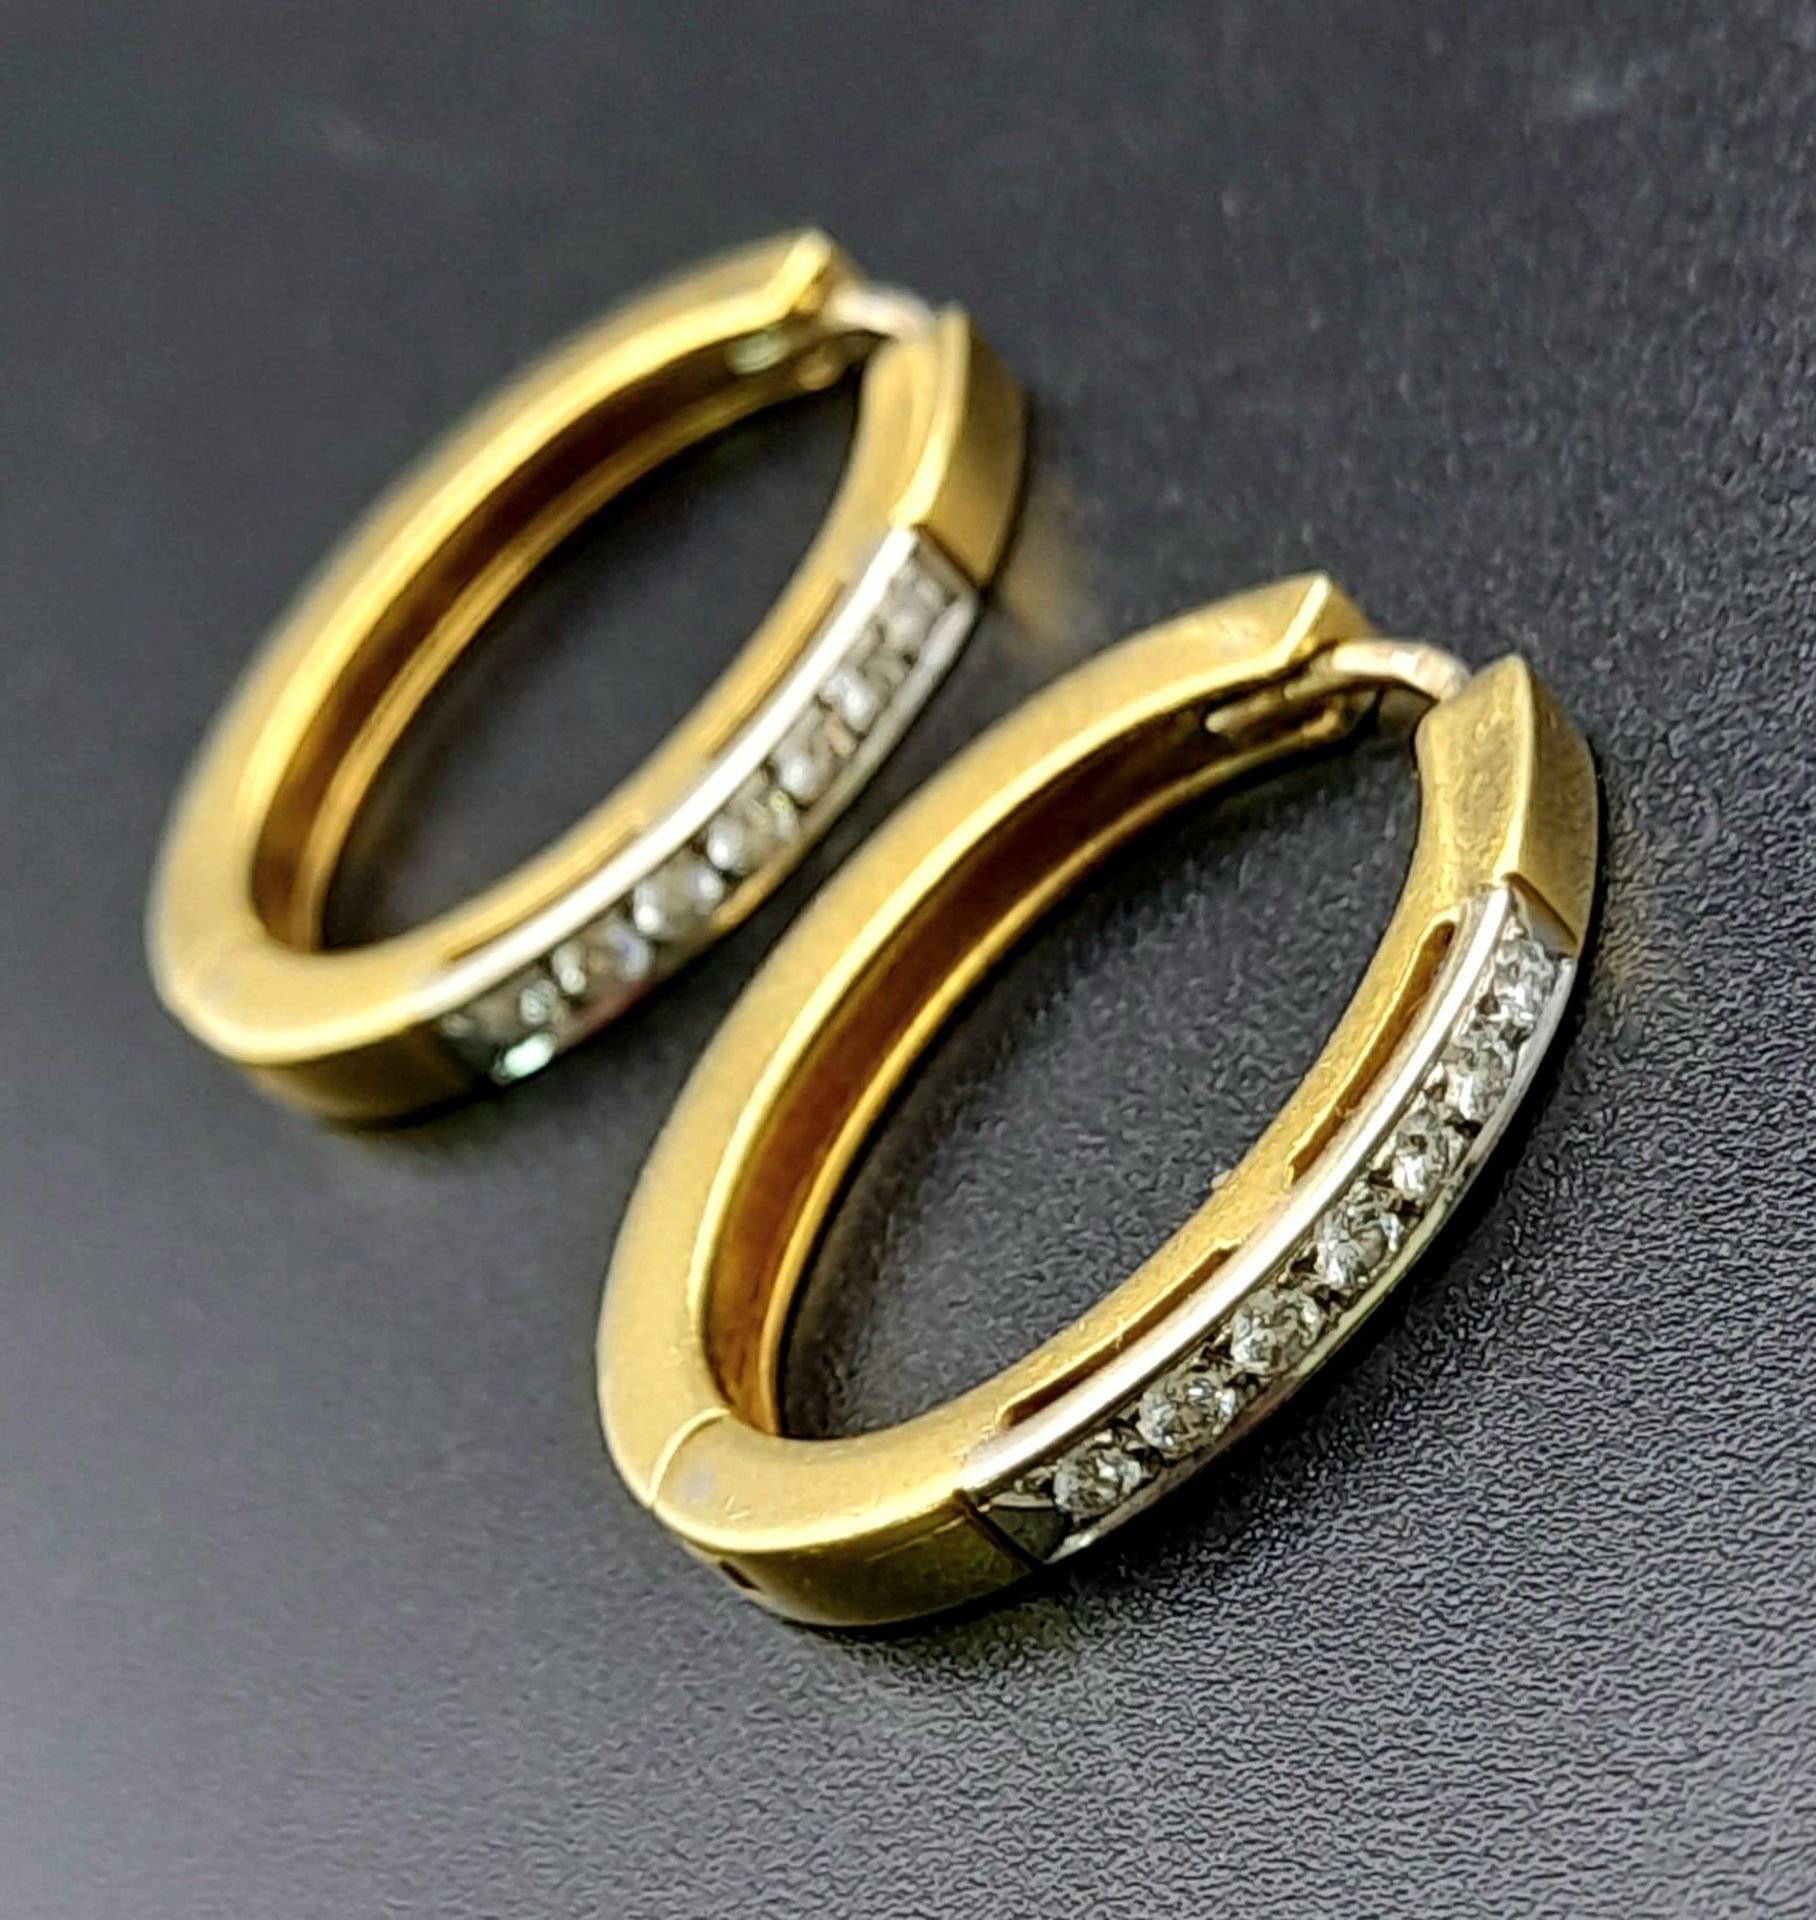 A PAIR OF 18K YELLOW GOLD 0.40CT DIAMOND SET EARRINGS. TOTAL WEIGHT 10.8G.